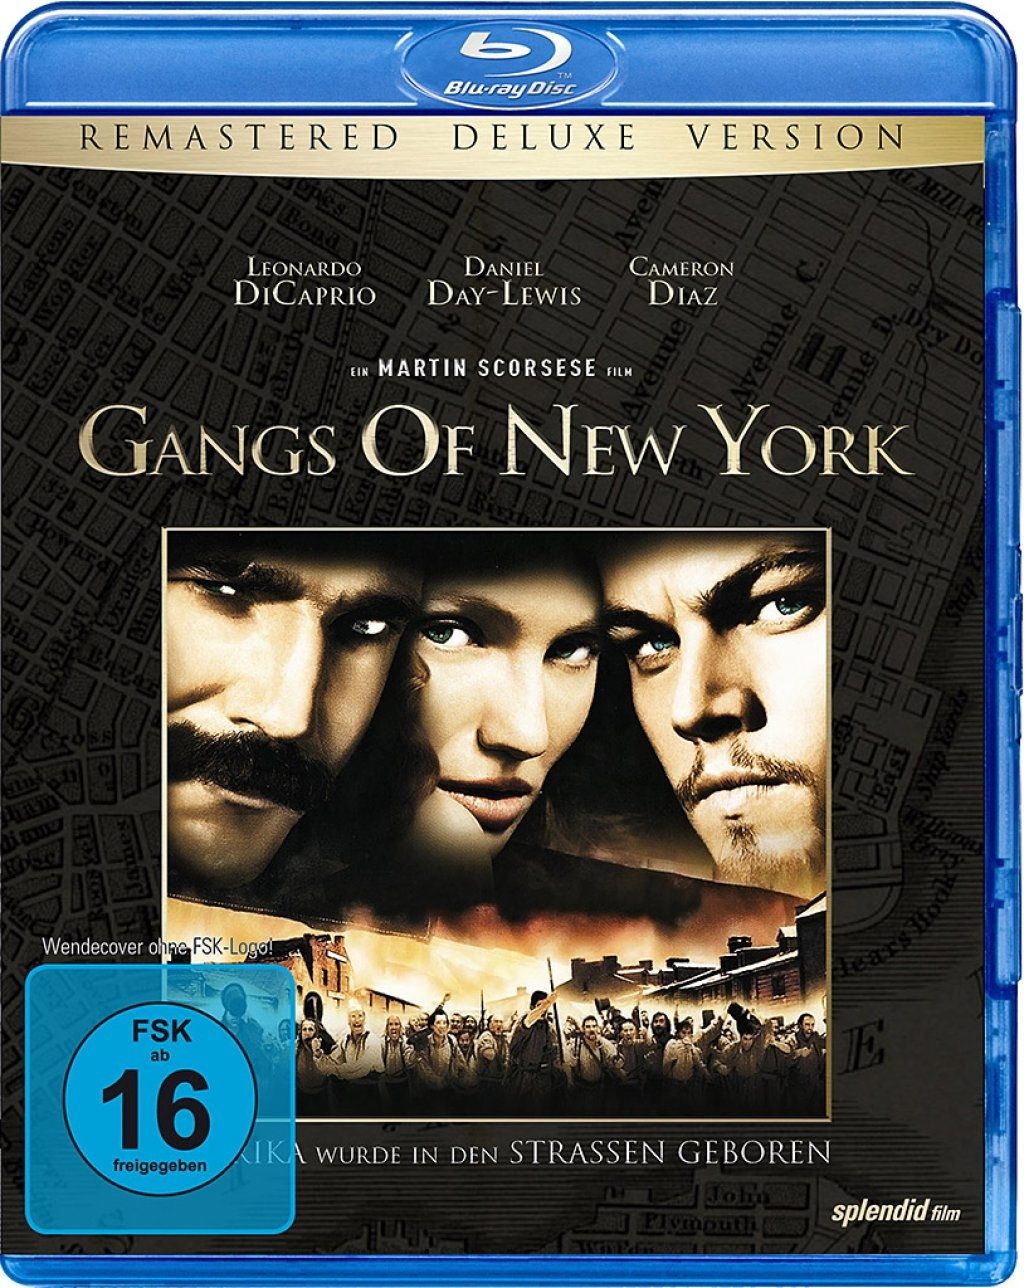 Gangs of New York (Remastered Deluxe Edition) (BLURAY)